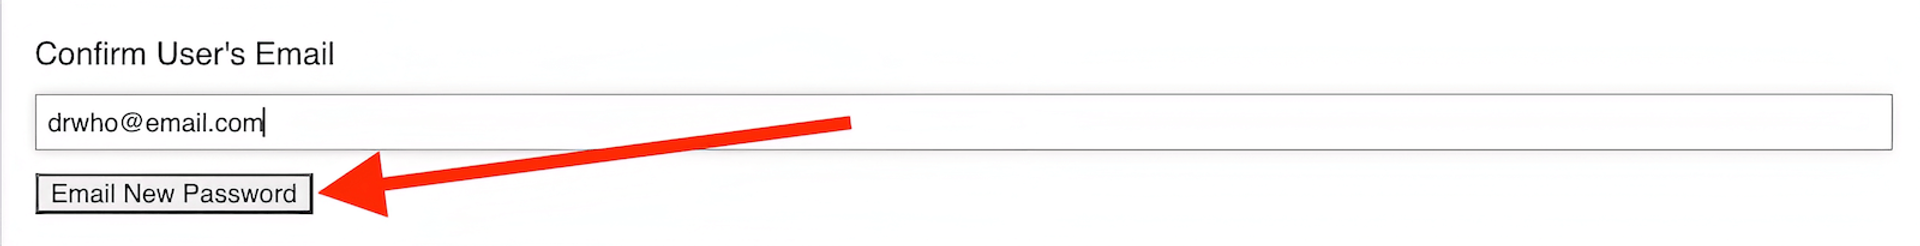 A form labeled 'Confirm User's Email' with a red arrow pointing at the 'Email New Password' button